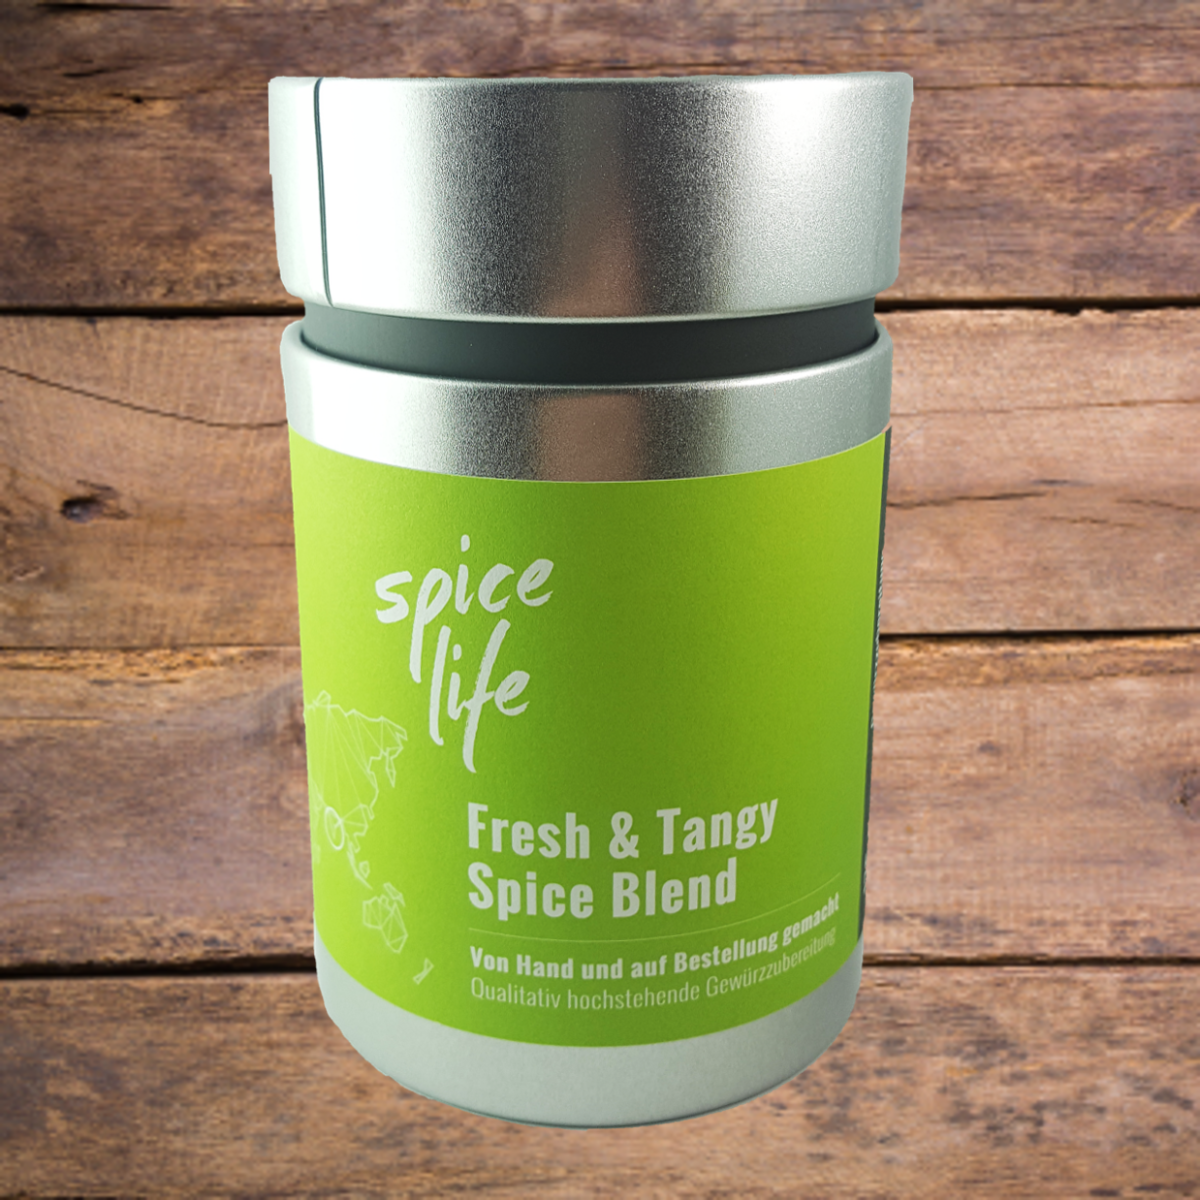 Fresh & Tangy Spice Blend